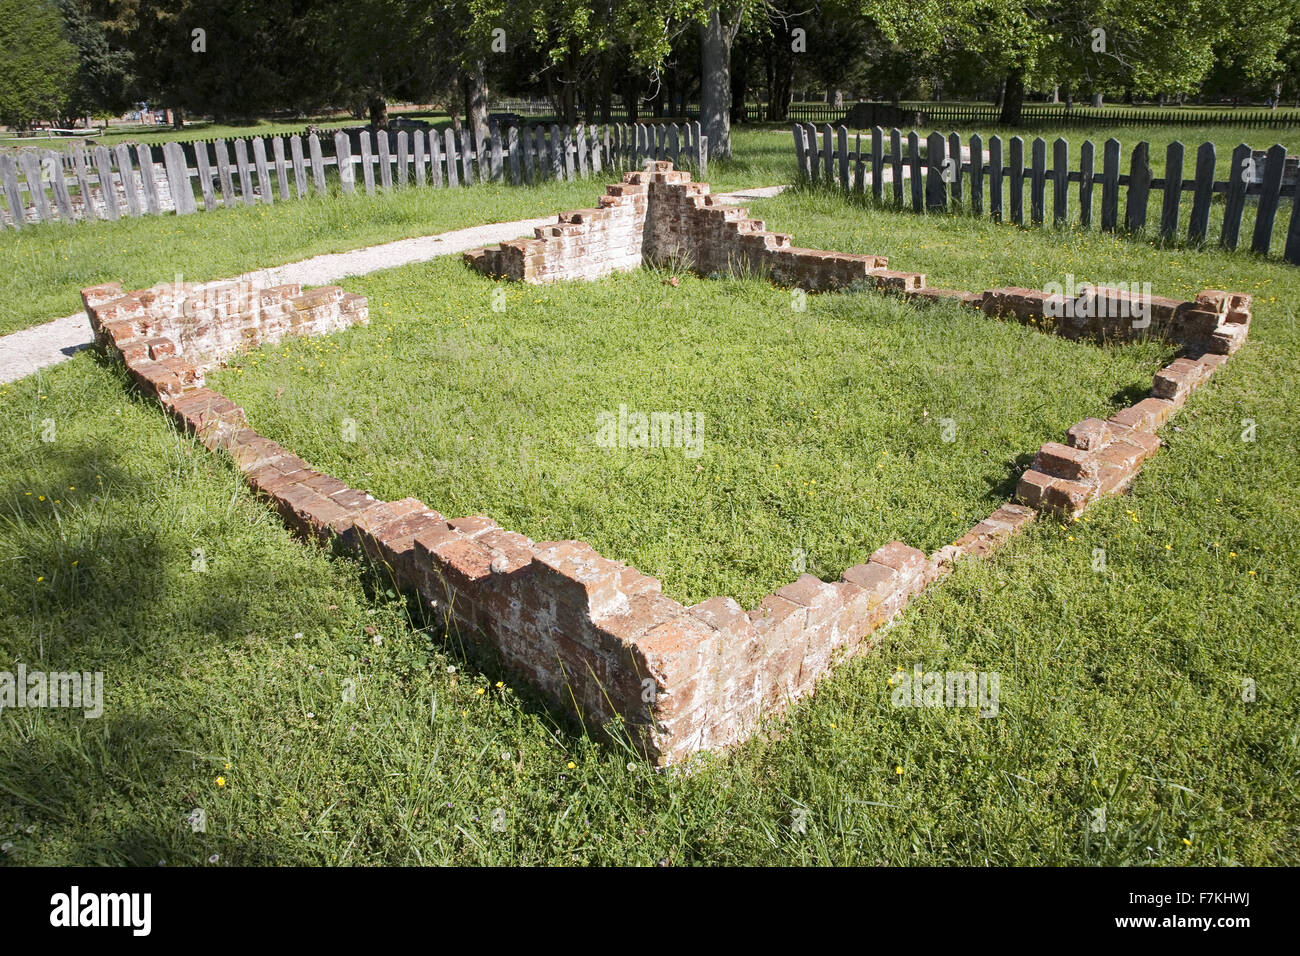 Early house foundations from the New Towne site of Jamestown, Jamestown Island, America's Birthplace, Virginia, built after 1620, the very first Main Street of America. Photo taken on 400th anniversary of Jamestown, the First Permanent English Settlement. Stock Photo